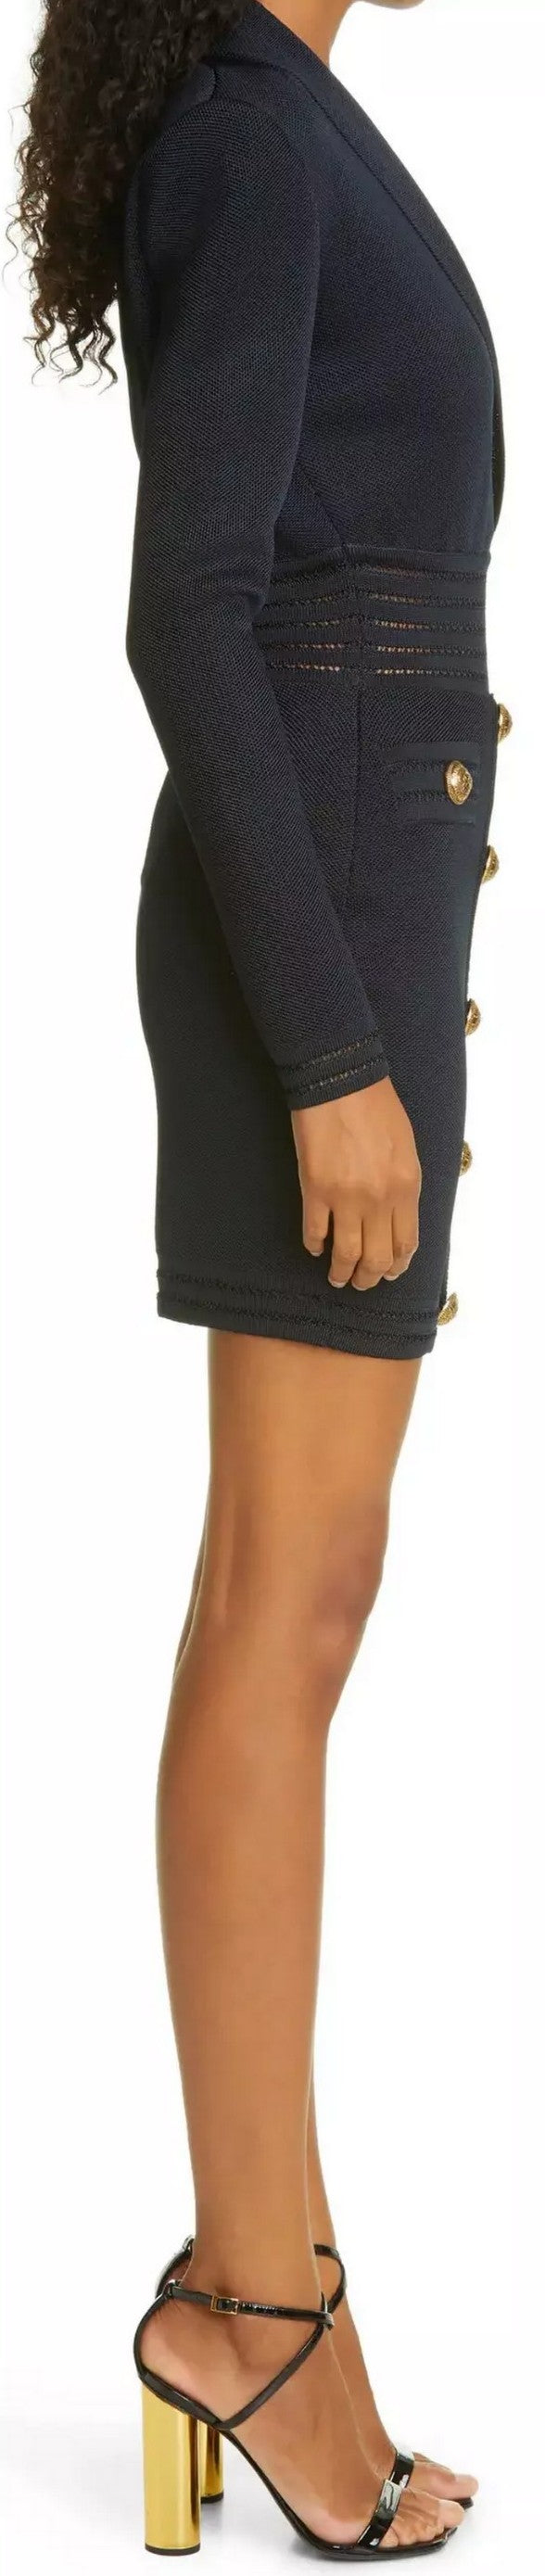 Short Knit Dress with Gold-Tone Buttons, Black DESIGNER INSPIRED FASHIONS